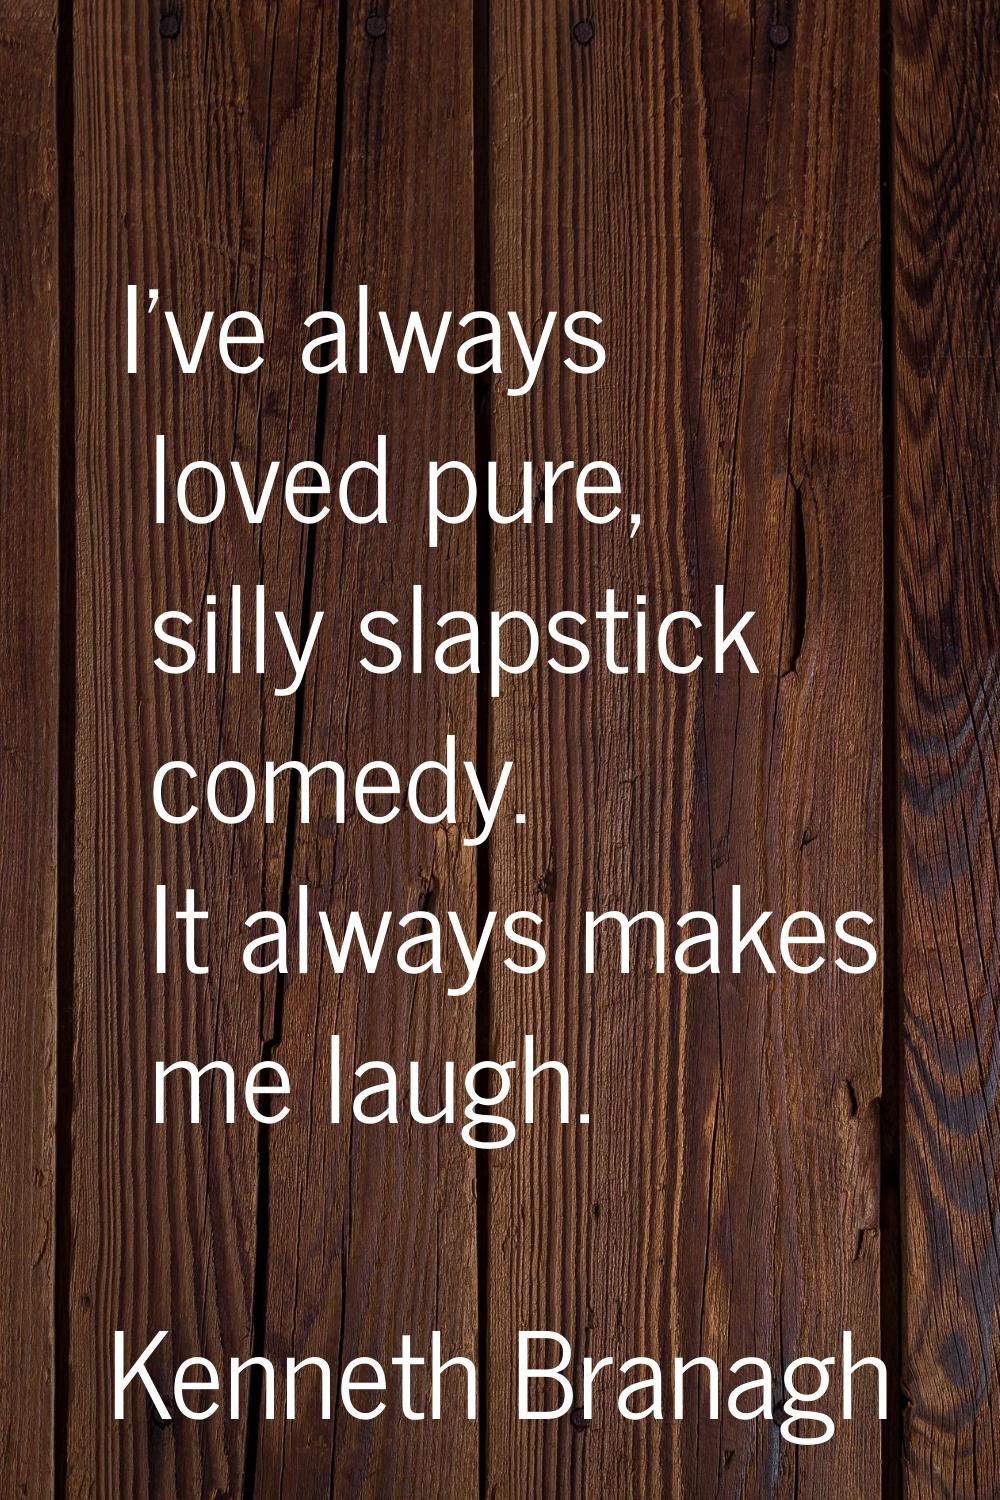 I've always loved pure, silly slapstick comedy. It always makes me laugh.